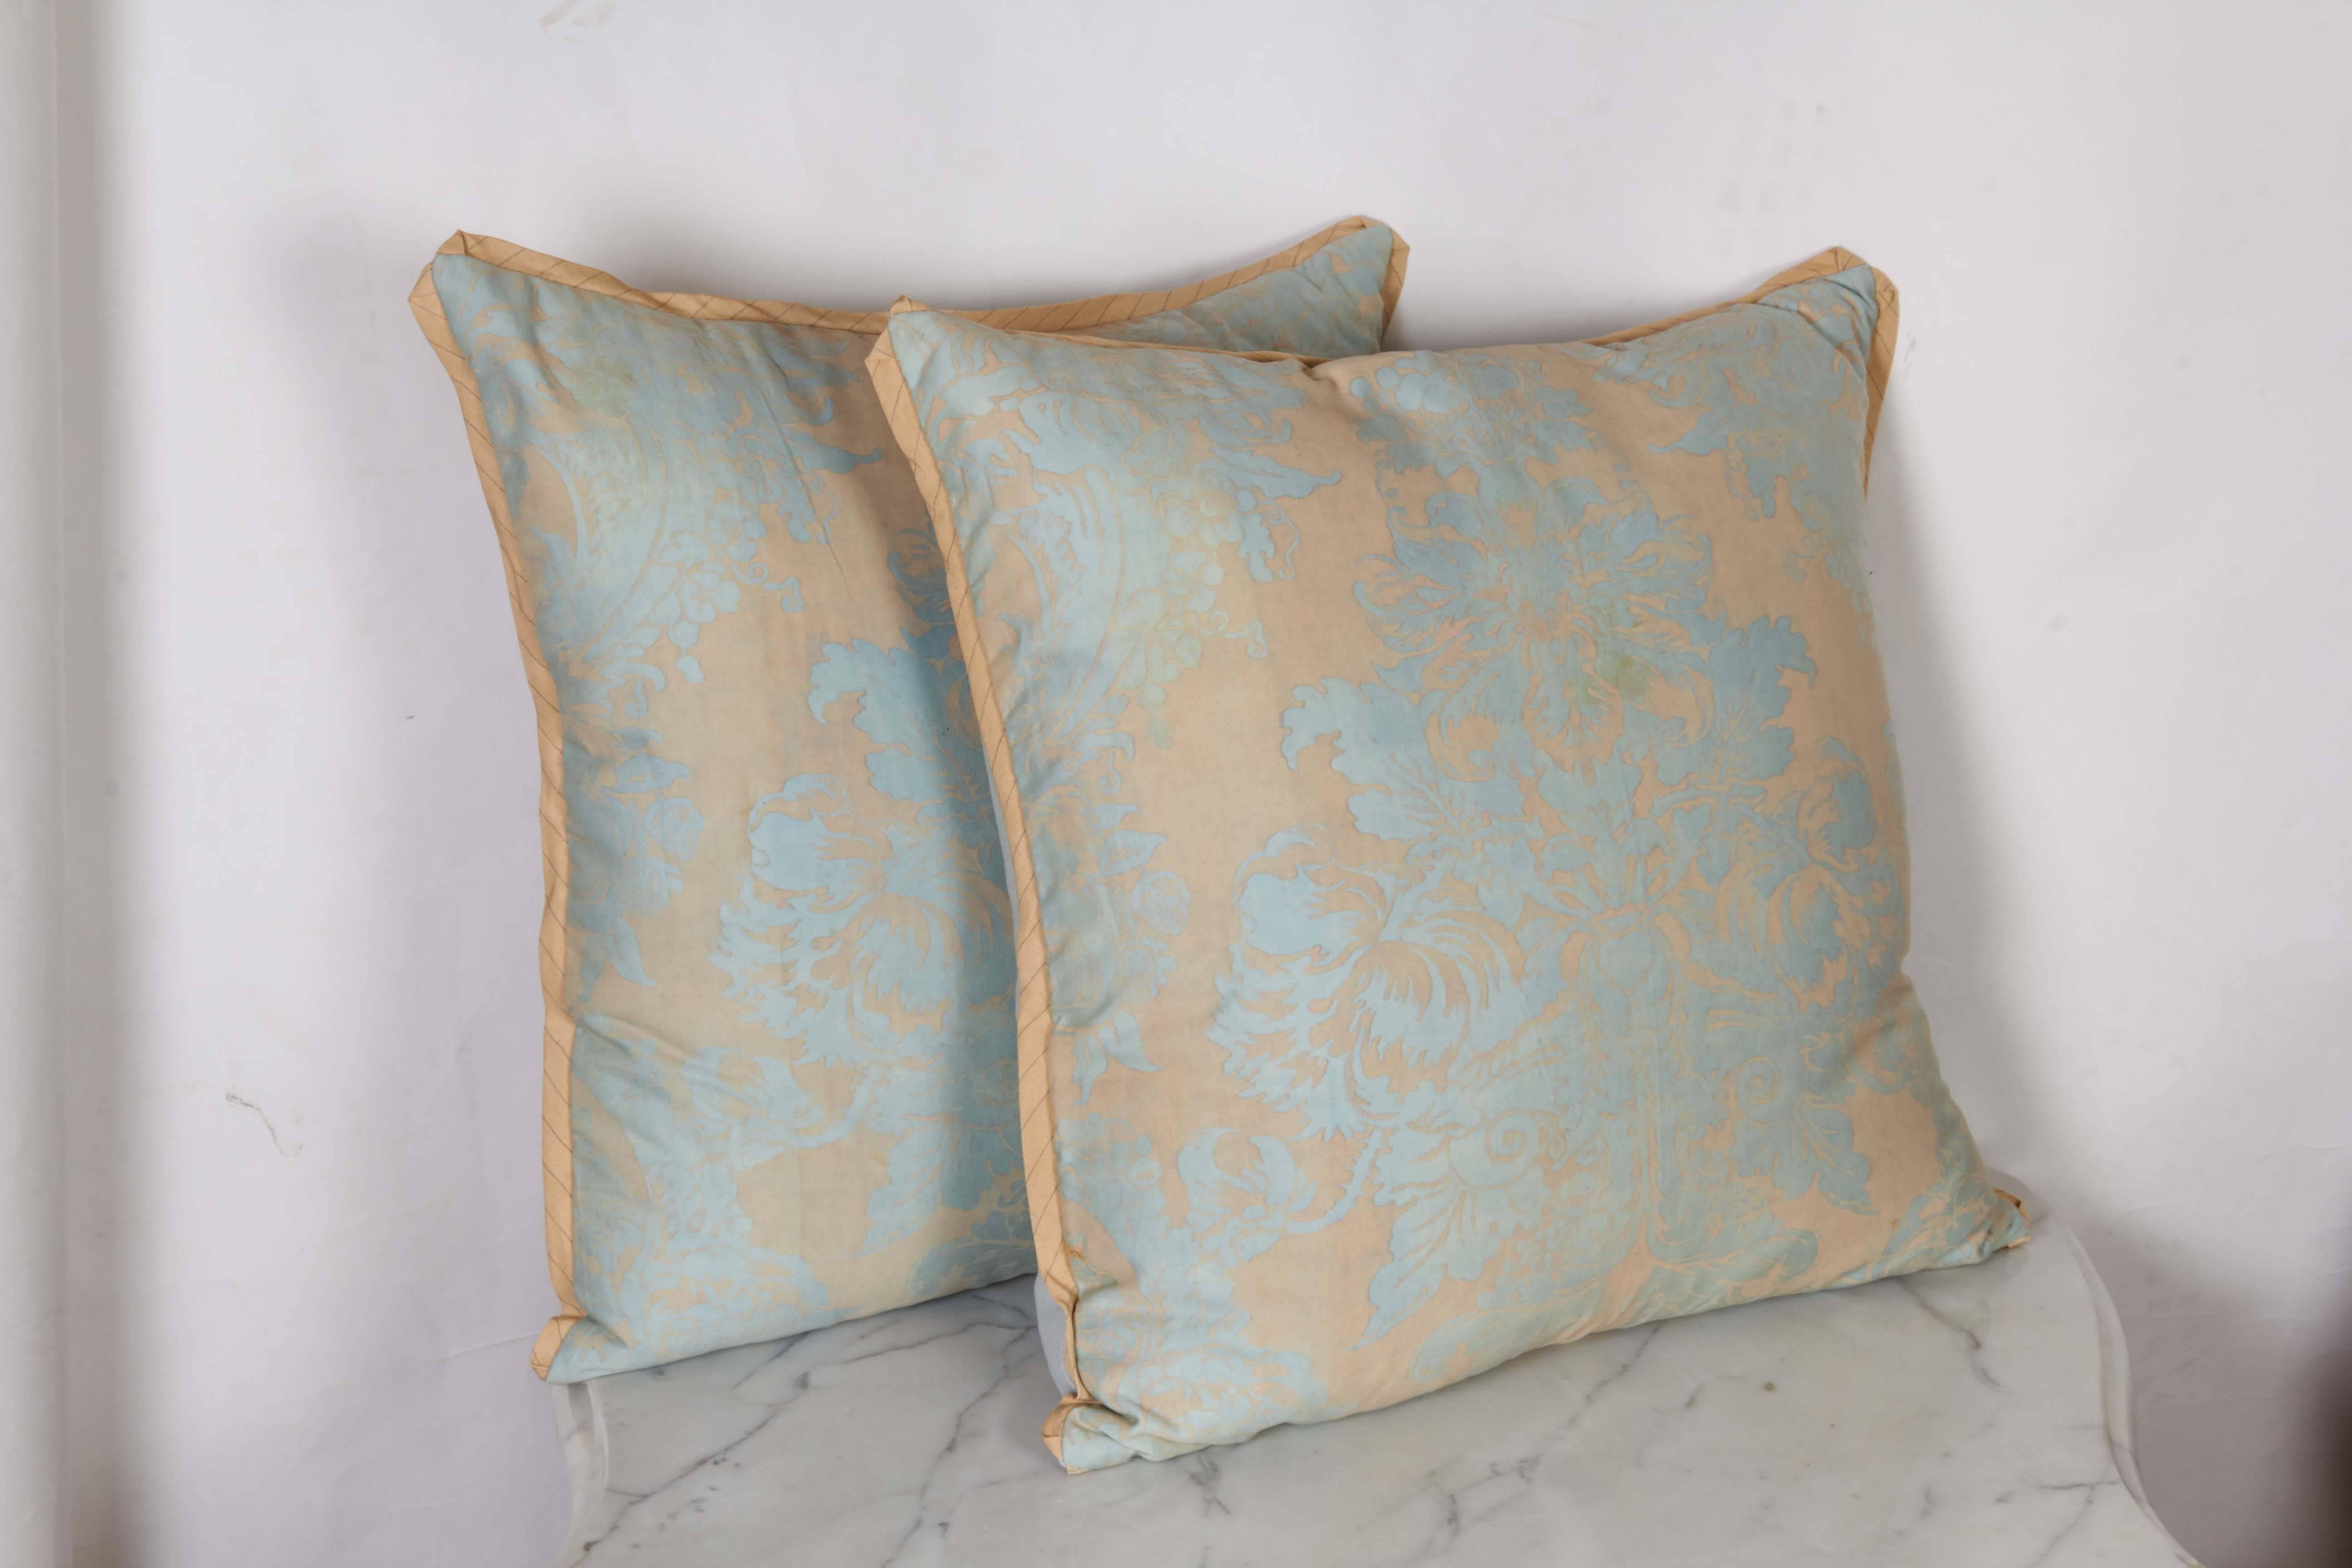 A set of Fortuny fabric cushion in the Dandolo pattern, three square cushions available and one lumbar cushion, moon light and white color way with Holland and Sherry powder blue cashmere backing fabric, striped silk bias edging, the pattern,